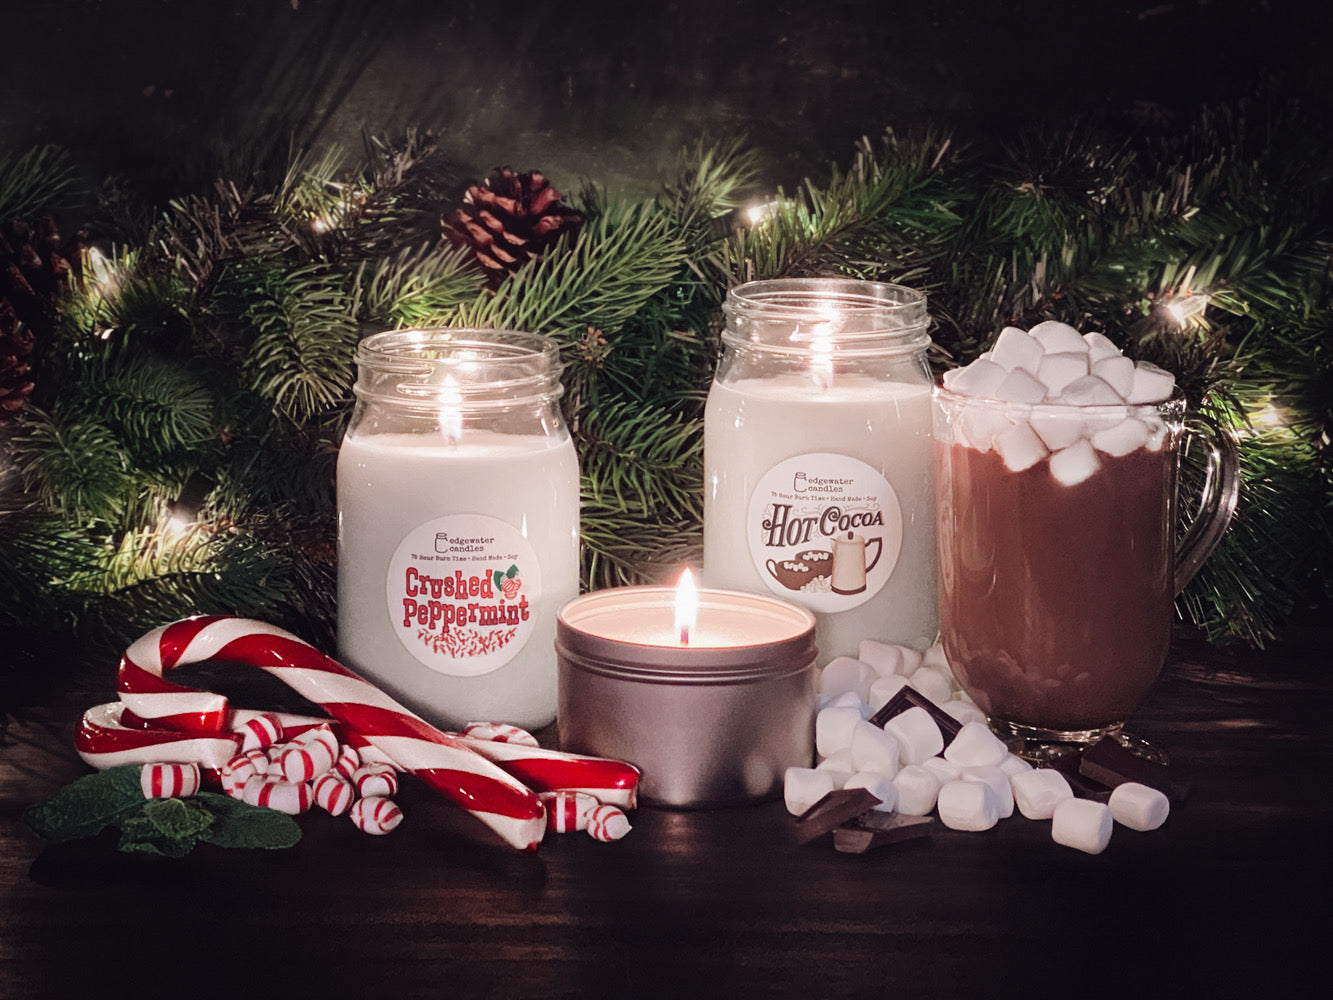 Introducing Hot Cocoa & Crushed Peppermint!